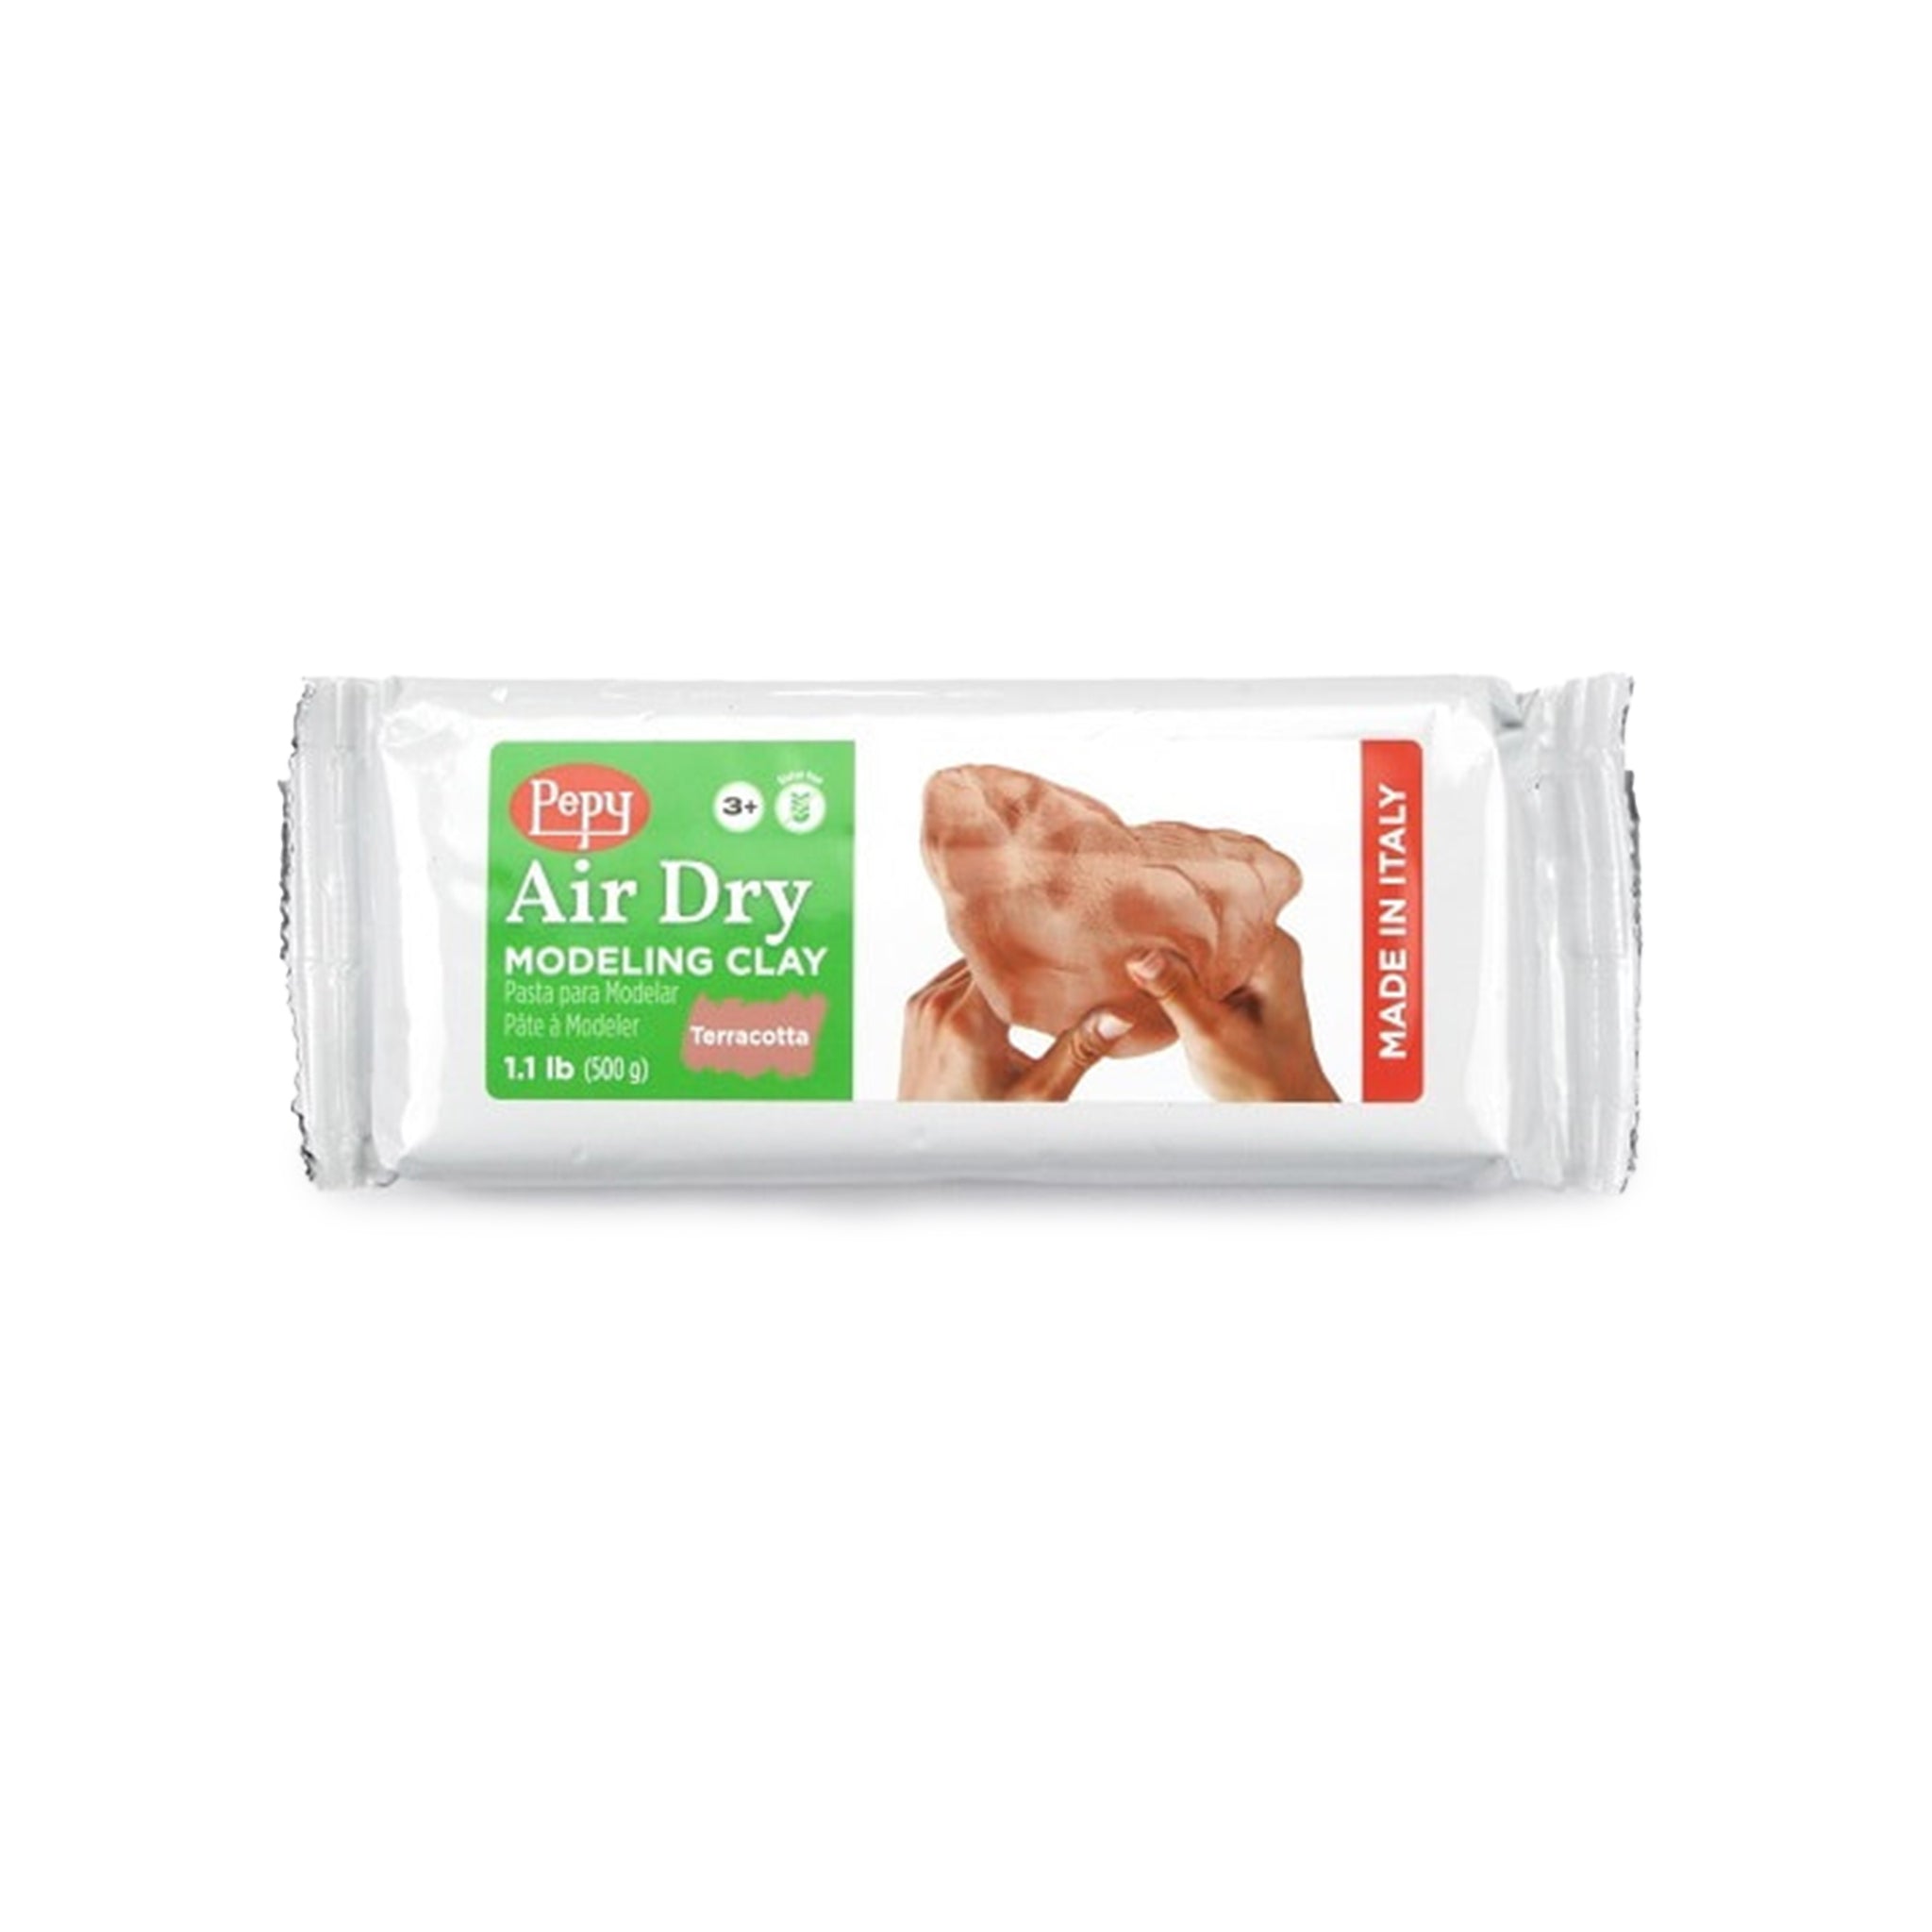 Pepy Premium European Air Dry Modeling Clay White 2.2 Lb Bar, Easy to Use  Air-hardening and Non-staining Clay for Classroom and Montessori 